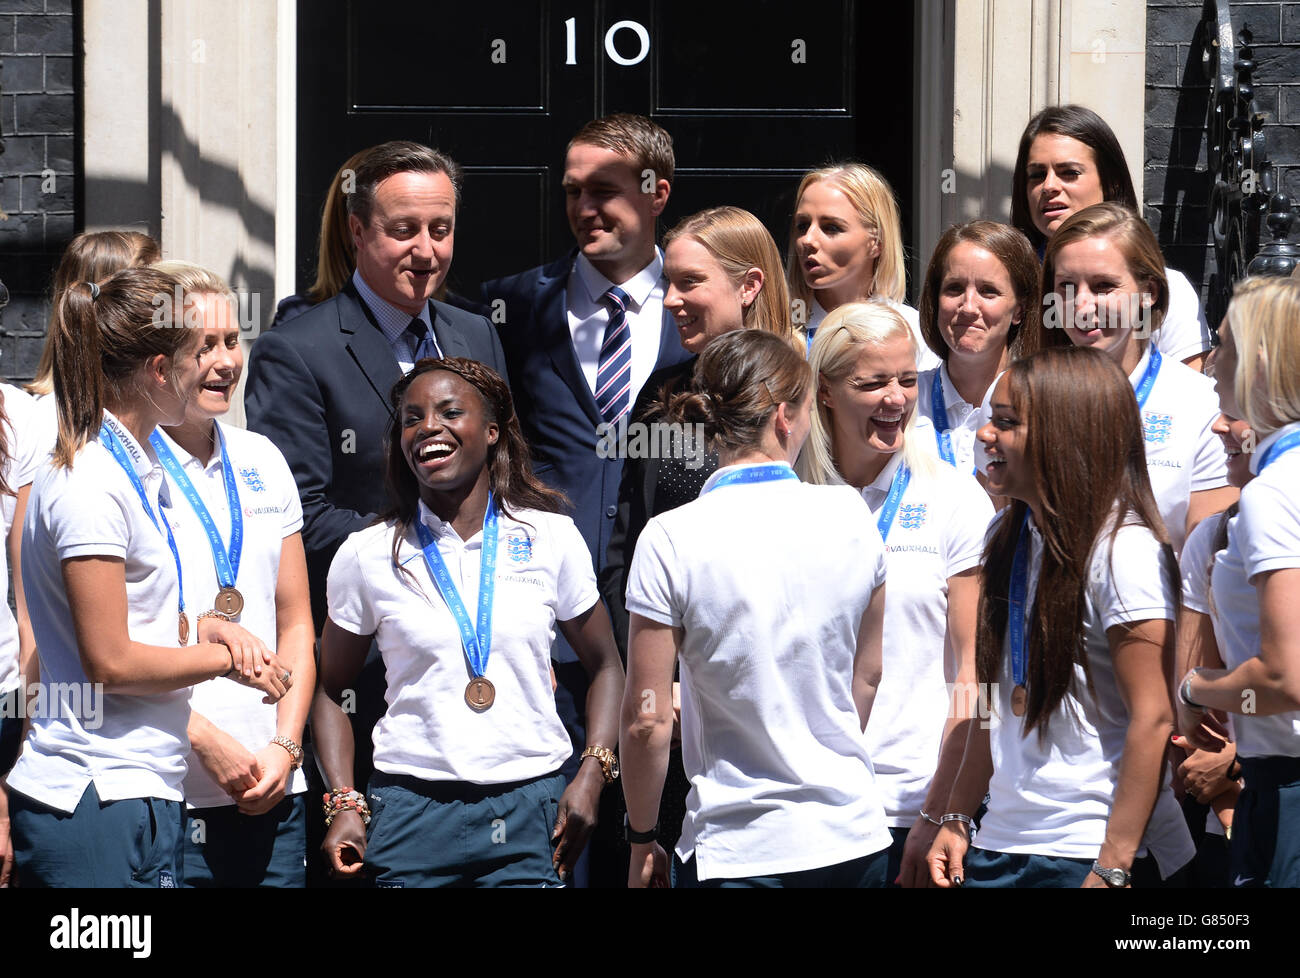 Members of England Women's Football team stand on the steps of 10 Downing Street, London, with Prime Minister David Cameron after a reception. Stock Photo